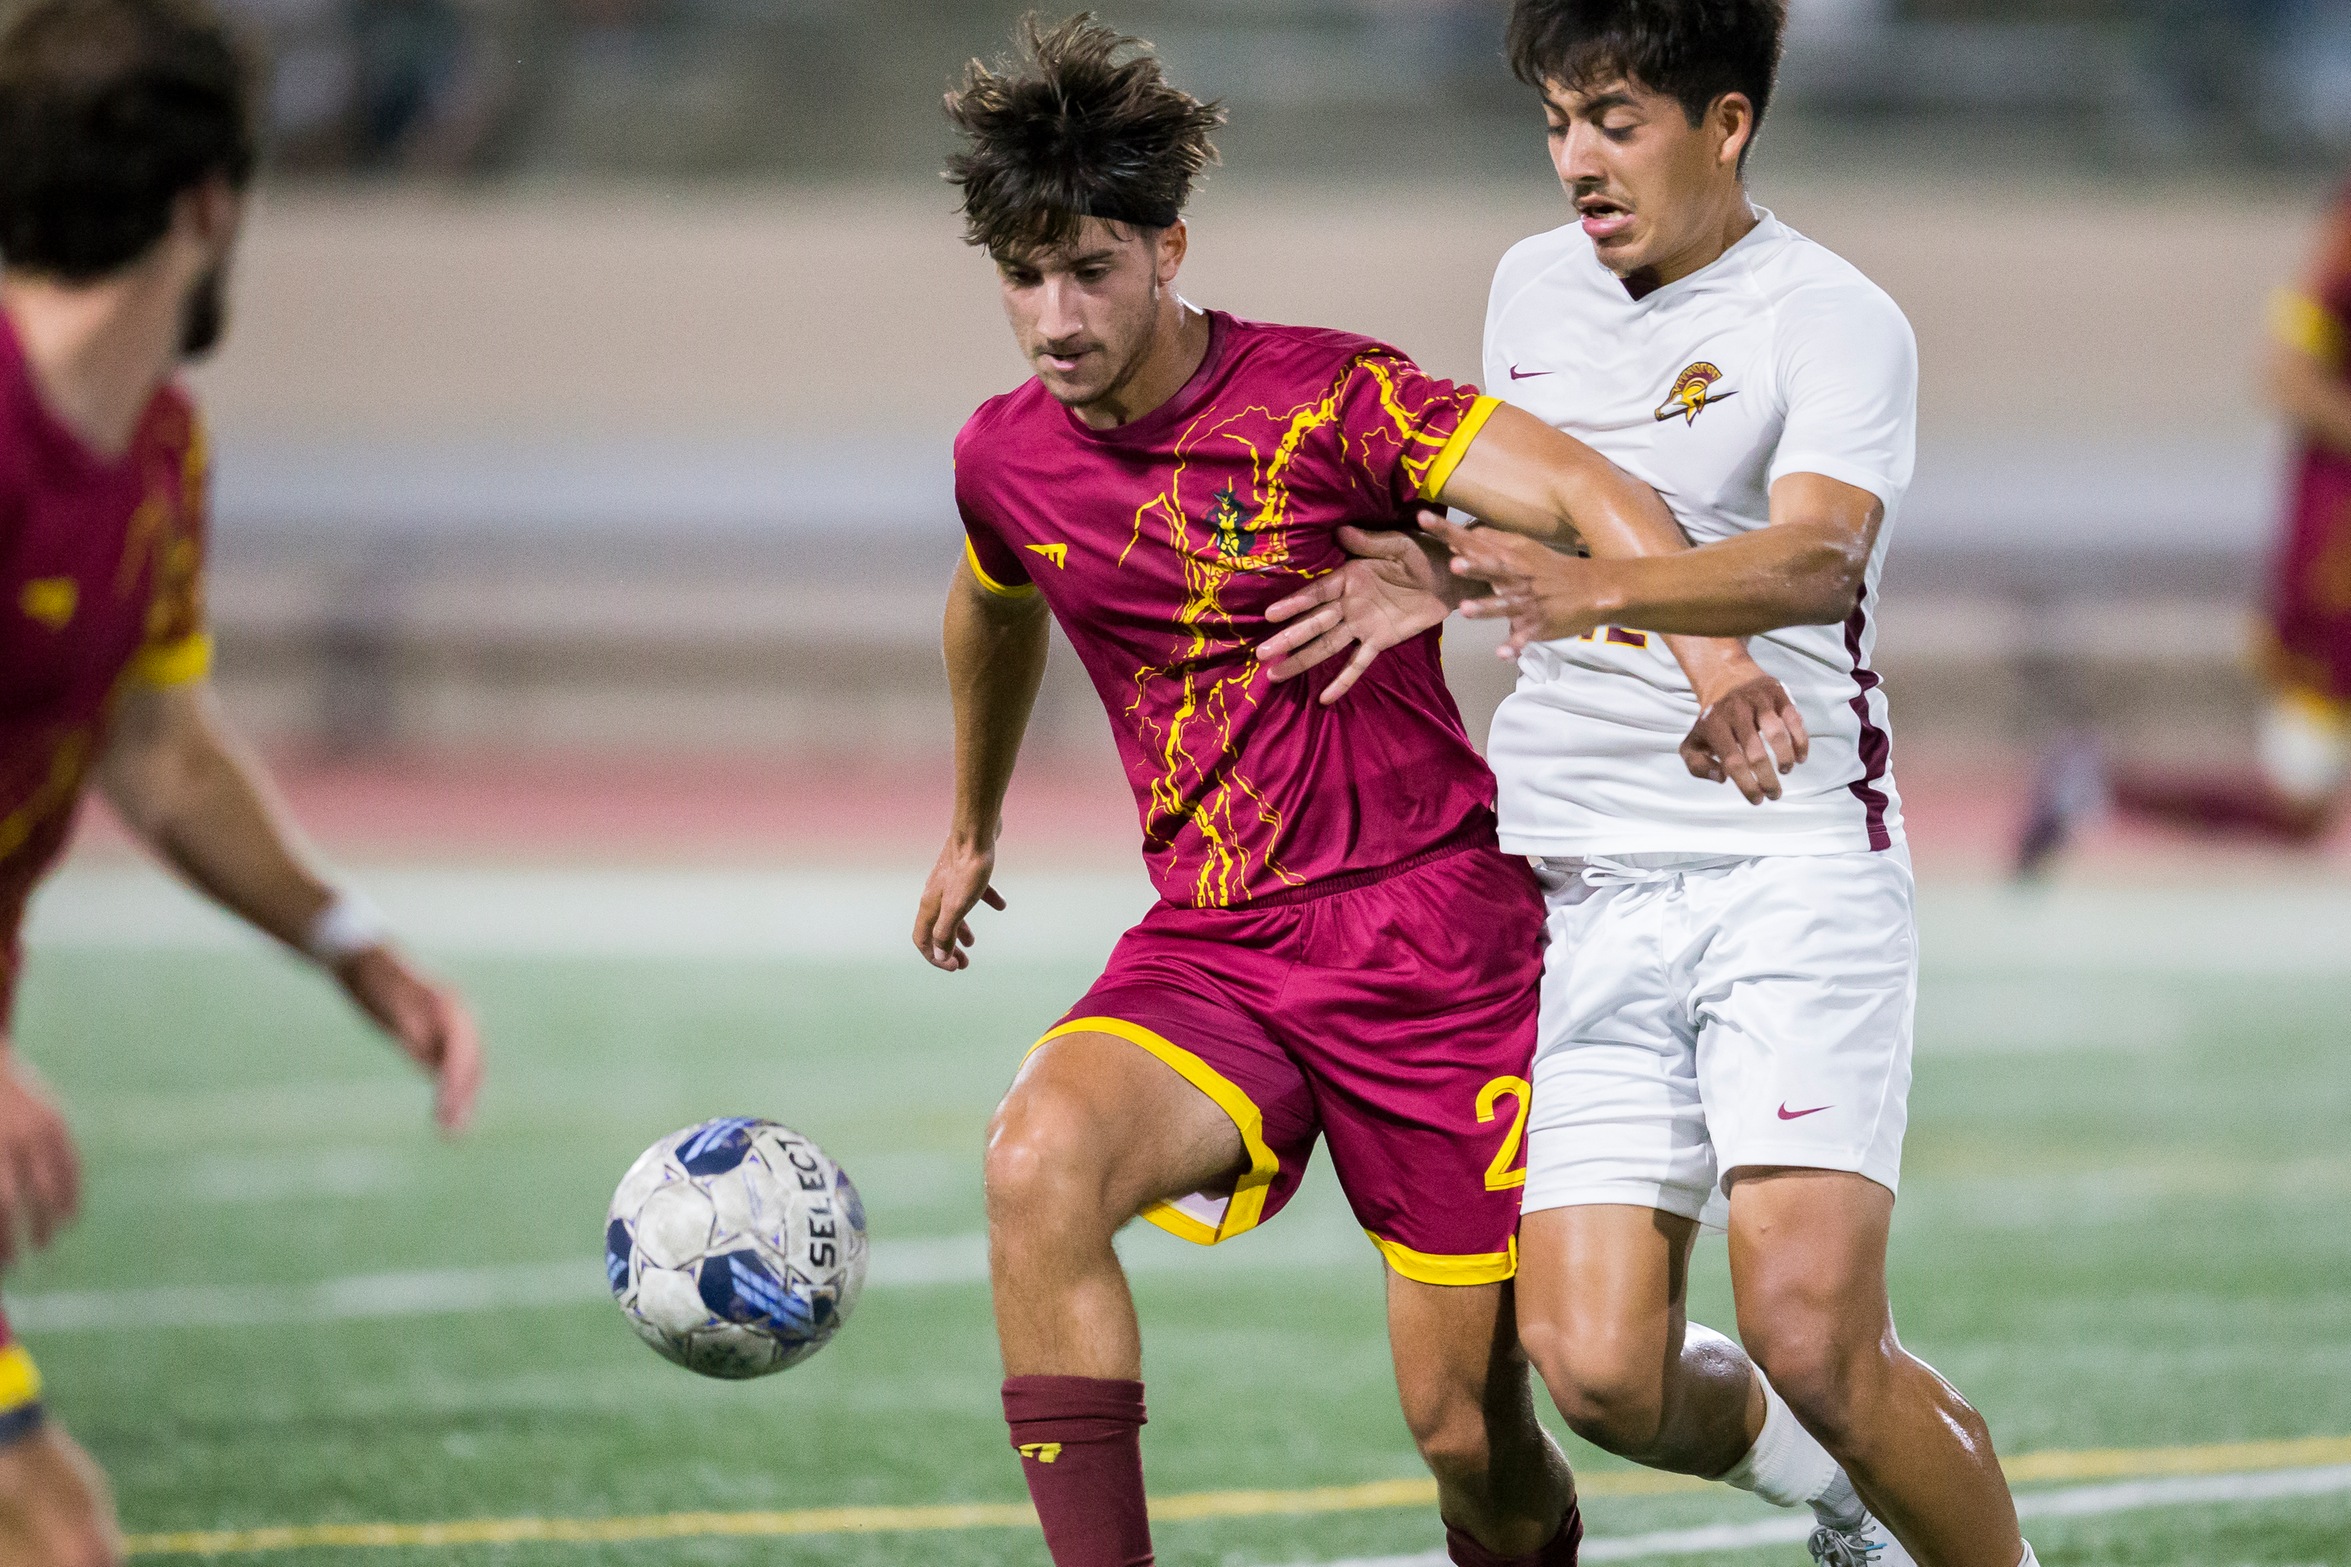 GCC Men's Soccer falls to East Los Angeles 3-2 on the road Sept. 22